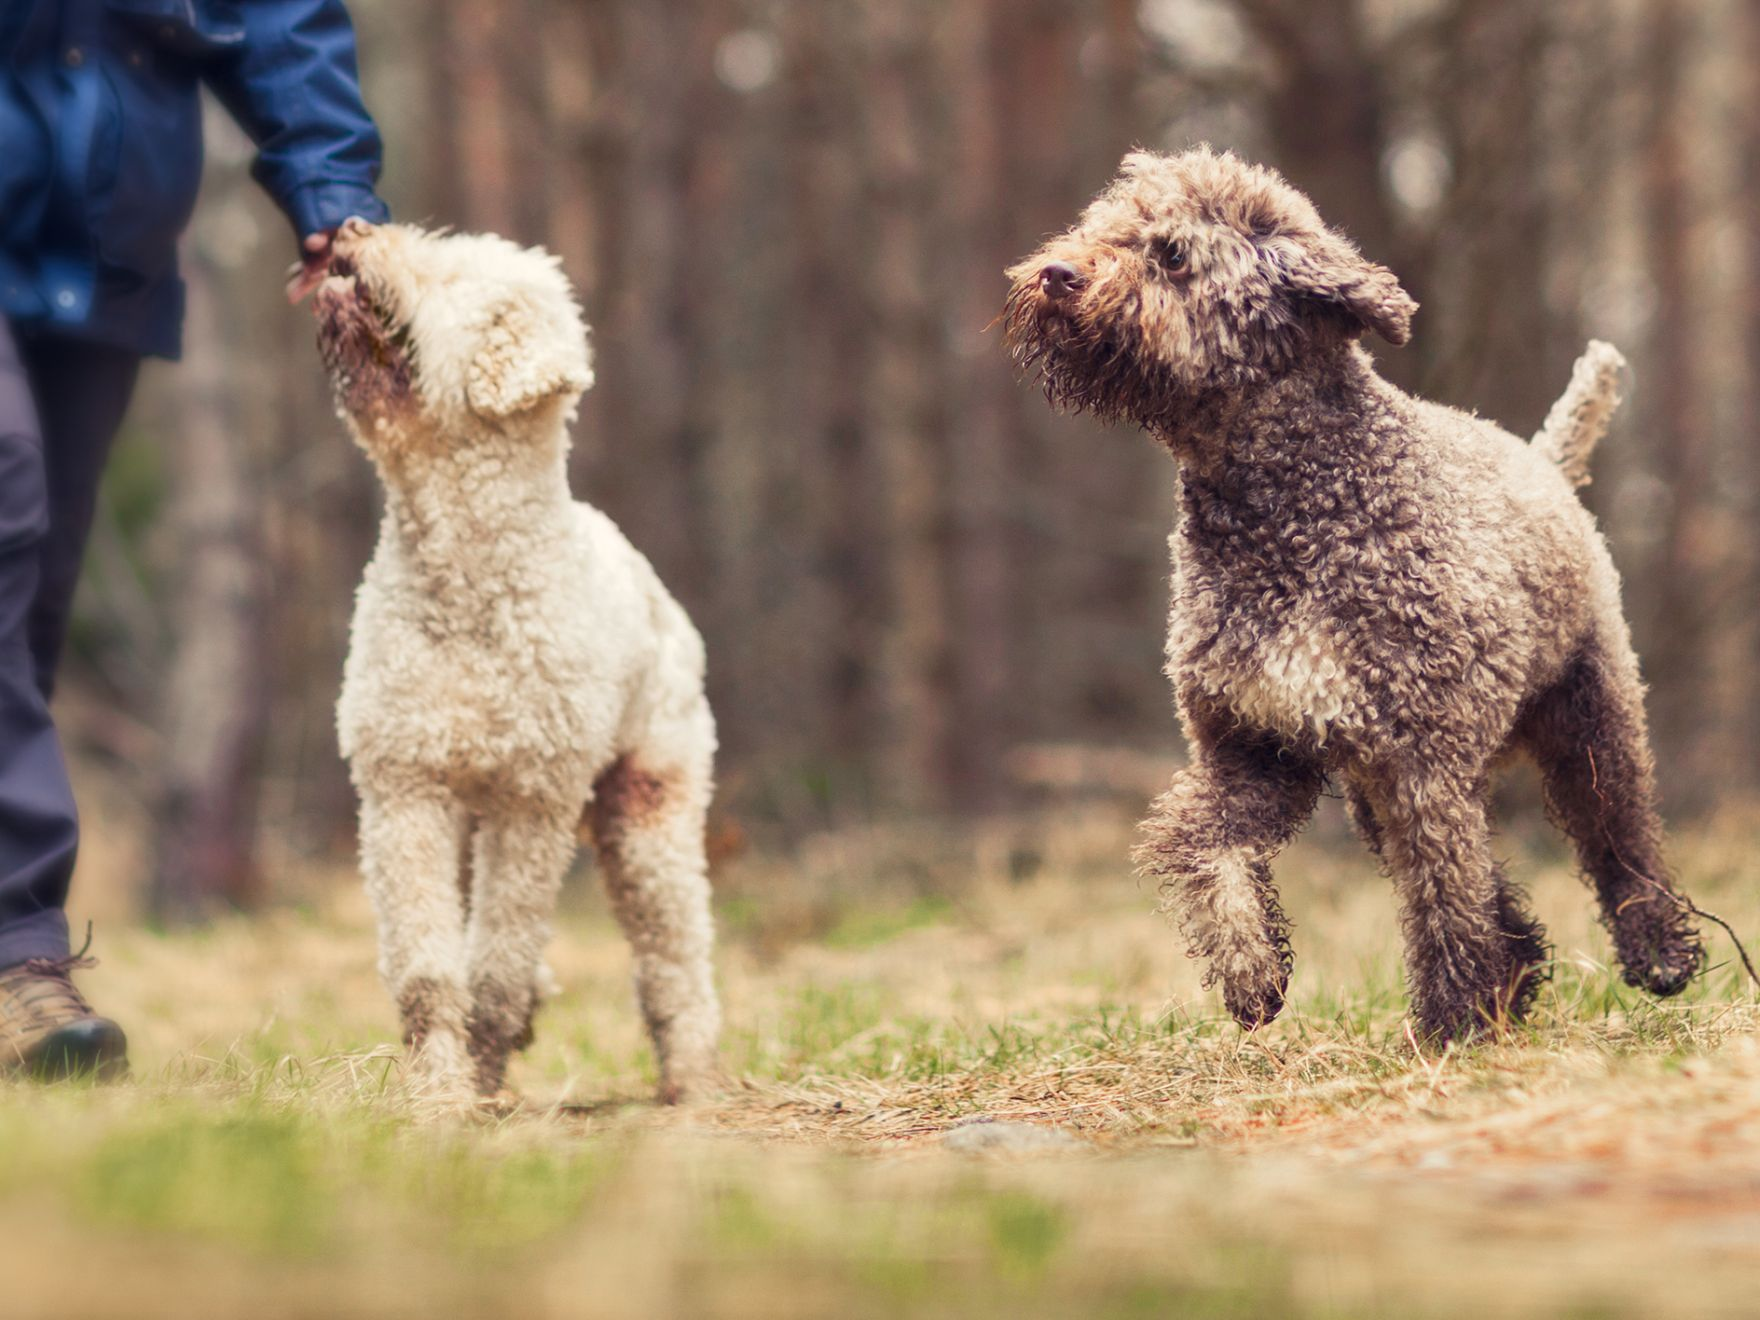 Two curly-coated dogs out for a walk with owner in a forest